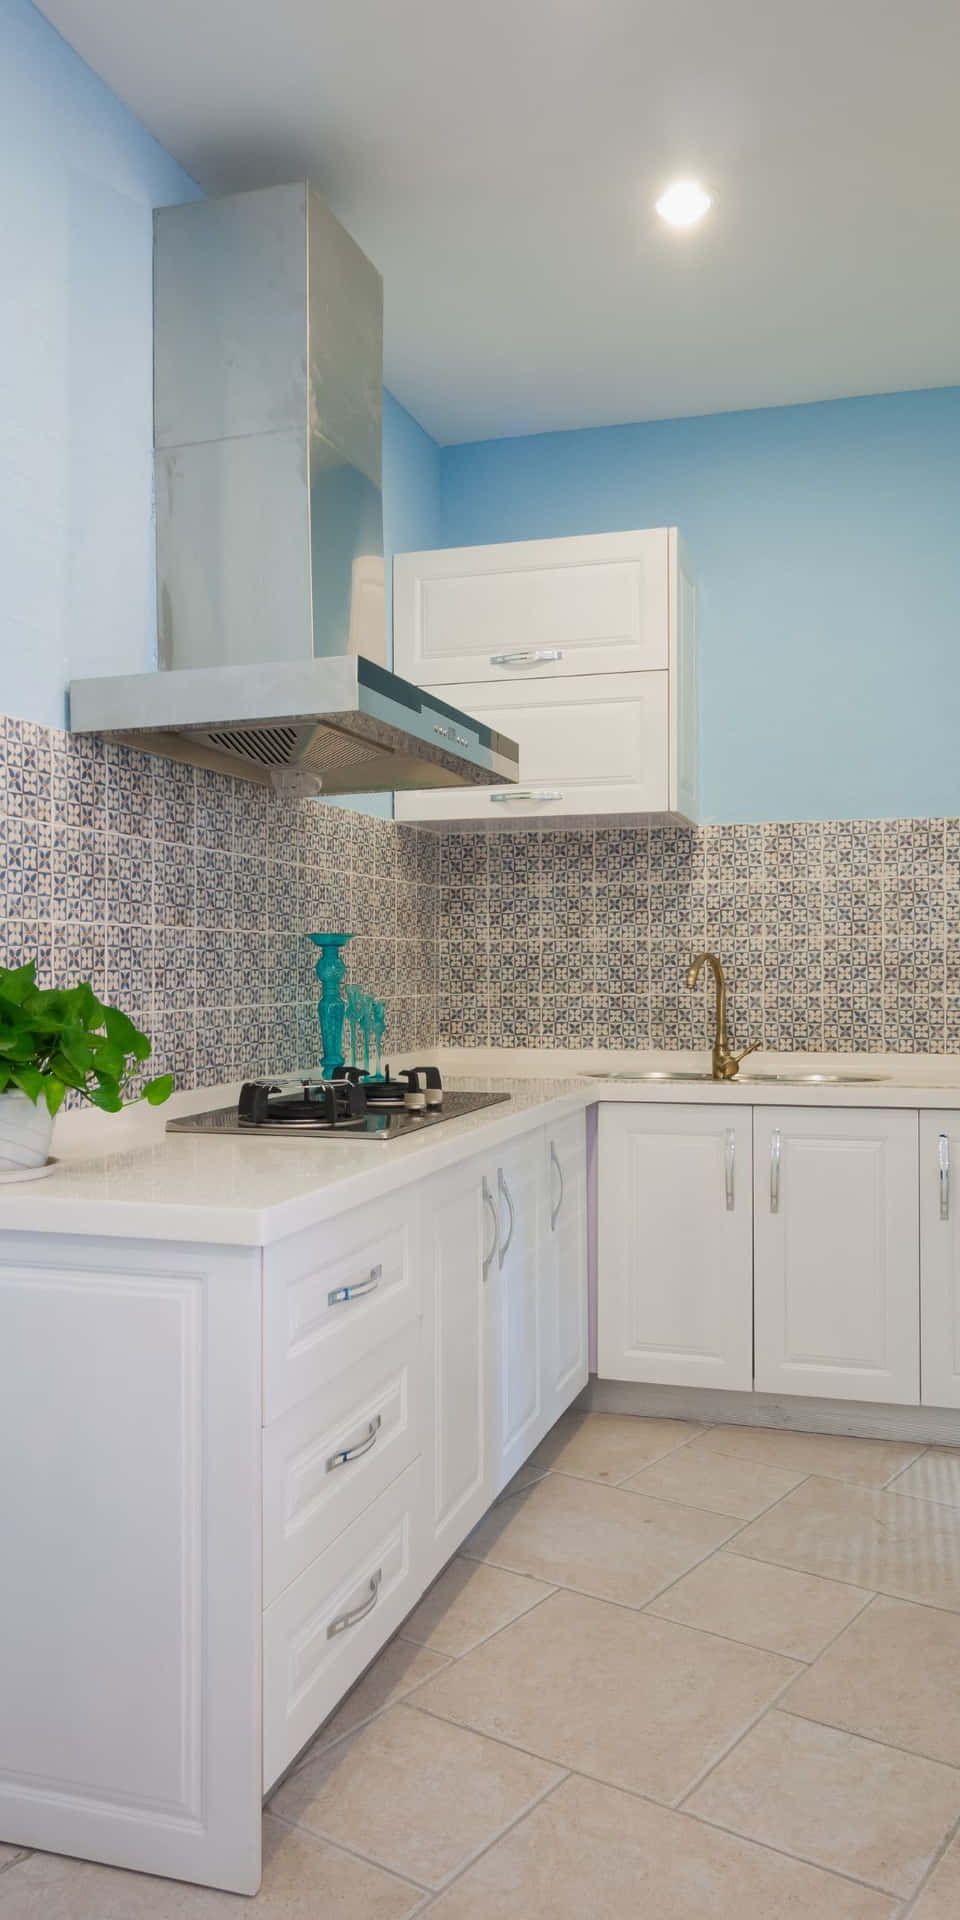 A White Kitchen With Blue Walls And Tile Floors